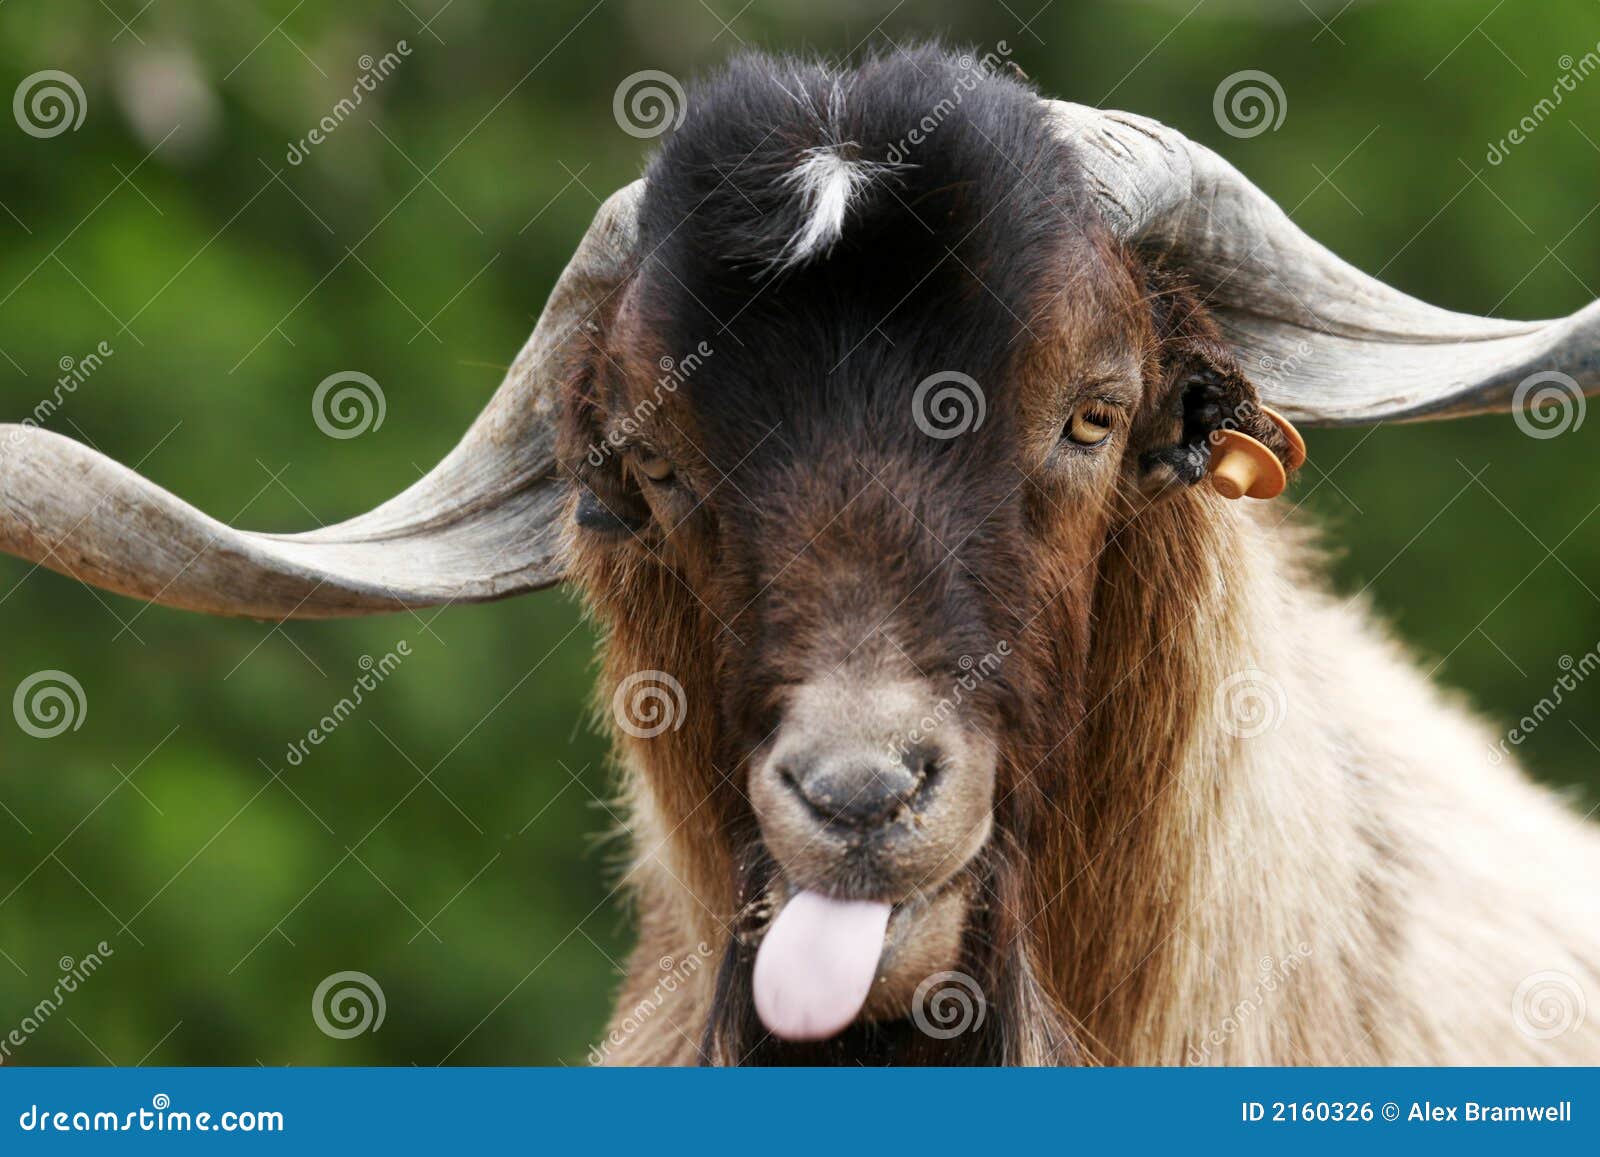 silly goat